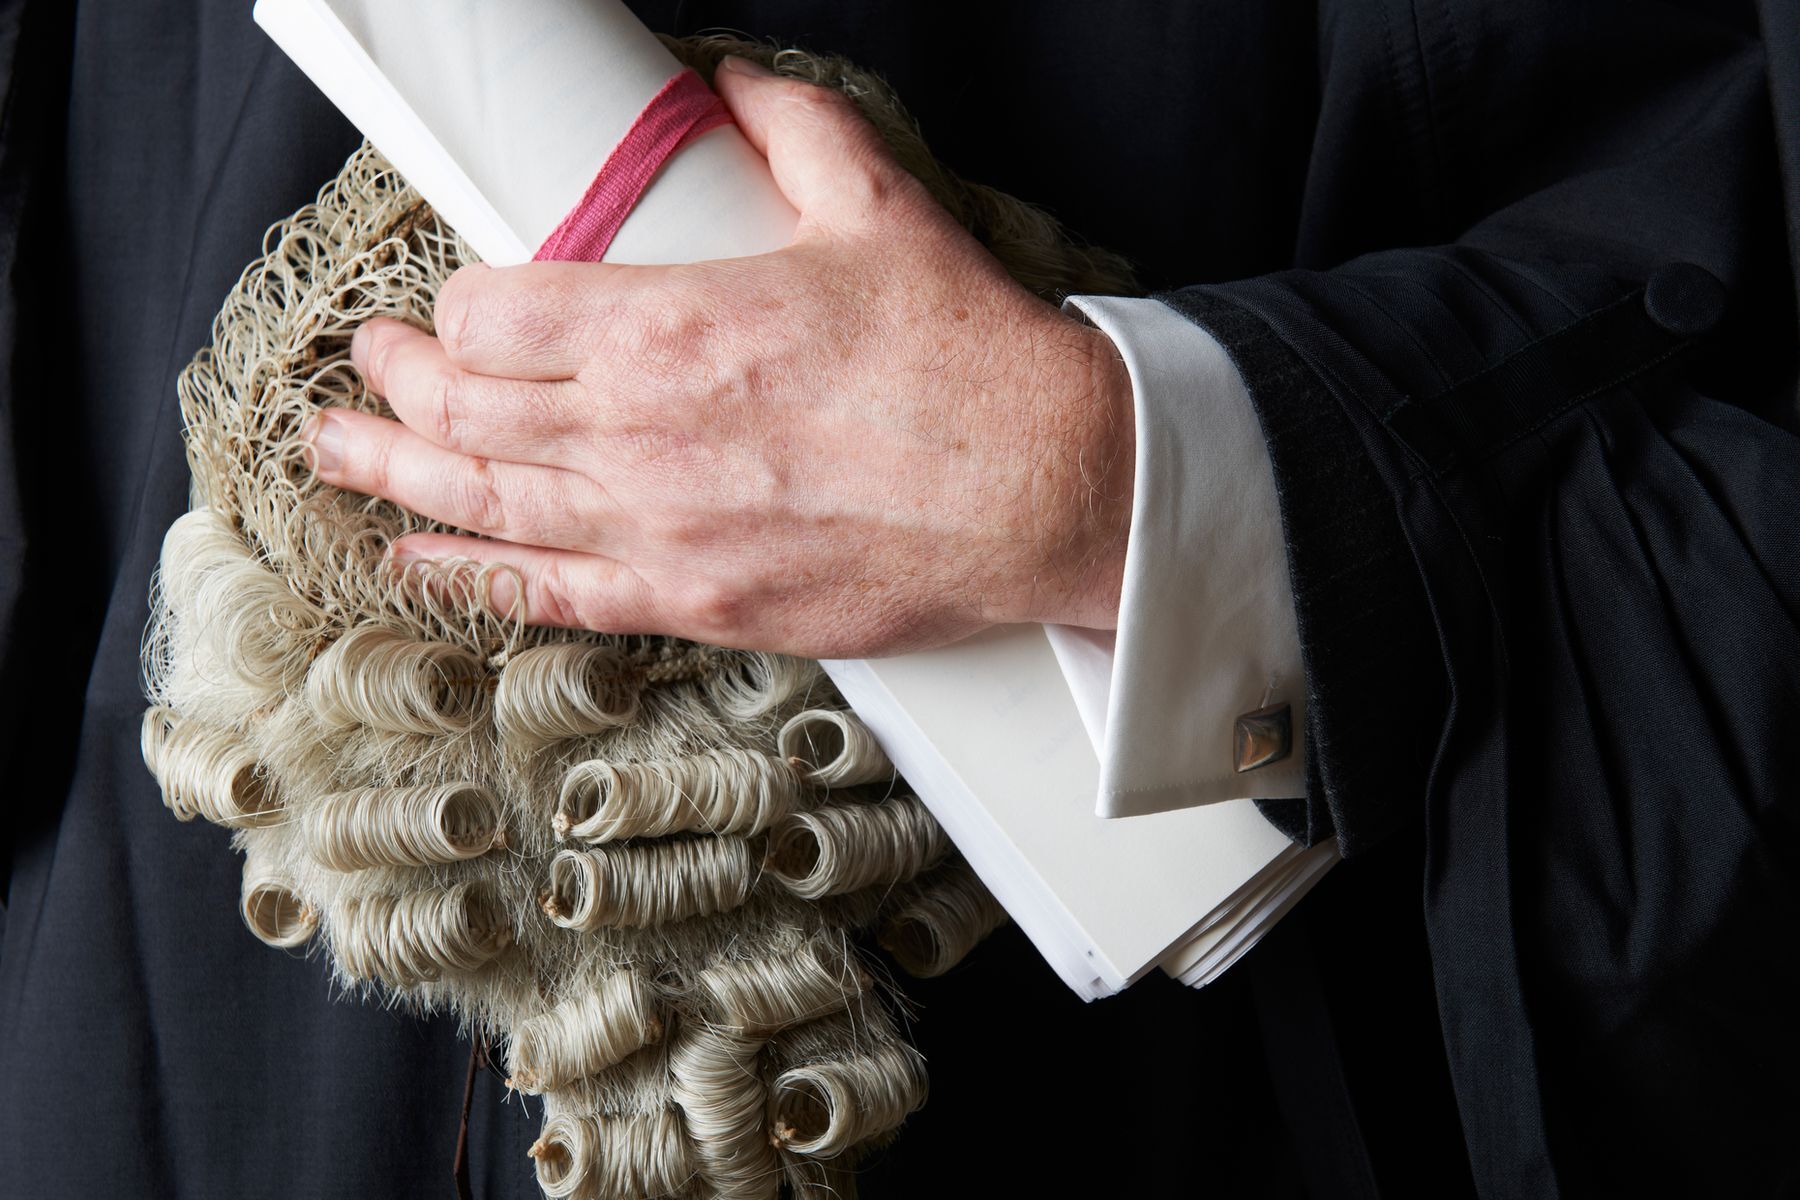 <p>They’re a sign of respect and formality, but barrister wigs can cause many around the world to scratch their heads in confusion. These big, white, curly wigs are worn by British lawyers in court and they have been since at least the <a href="https://harcourts.com/blog/why-british-judges-still-wear-judge-wigs-and-barrister-robes-in-court/" title="https://harcourts.com/blog/why-british-judges-still-wear-judge-wigs-and-barrister-robes-in-court/">17<sup>th</sup> century.</a> The wigs and robes have undergone some changes in the past 400 years, like <a href="https://www.law.ac.uk/resources/blog/why-do-barristers-wear-wigs/" title="https://www.law.ac.uk/resources/blog/why-do-barristers-wear-wigs/">becoming shorter</a>, but the tradition of donning a historical outfit to wear to court still lives on in Britain. </p>